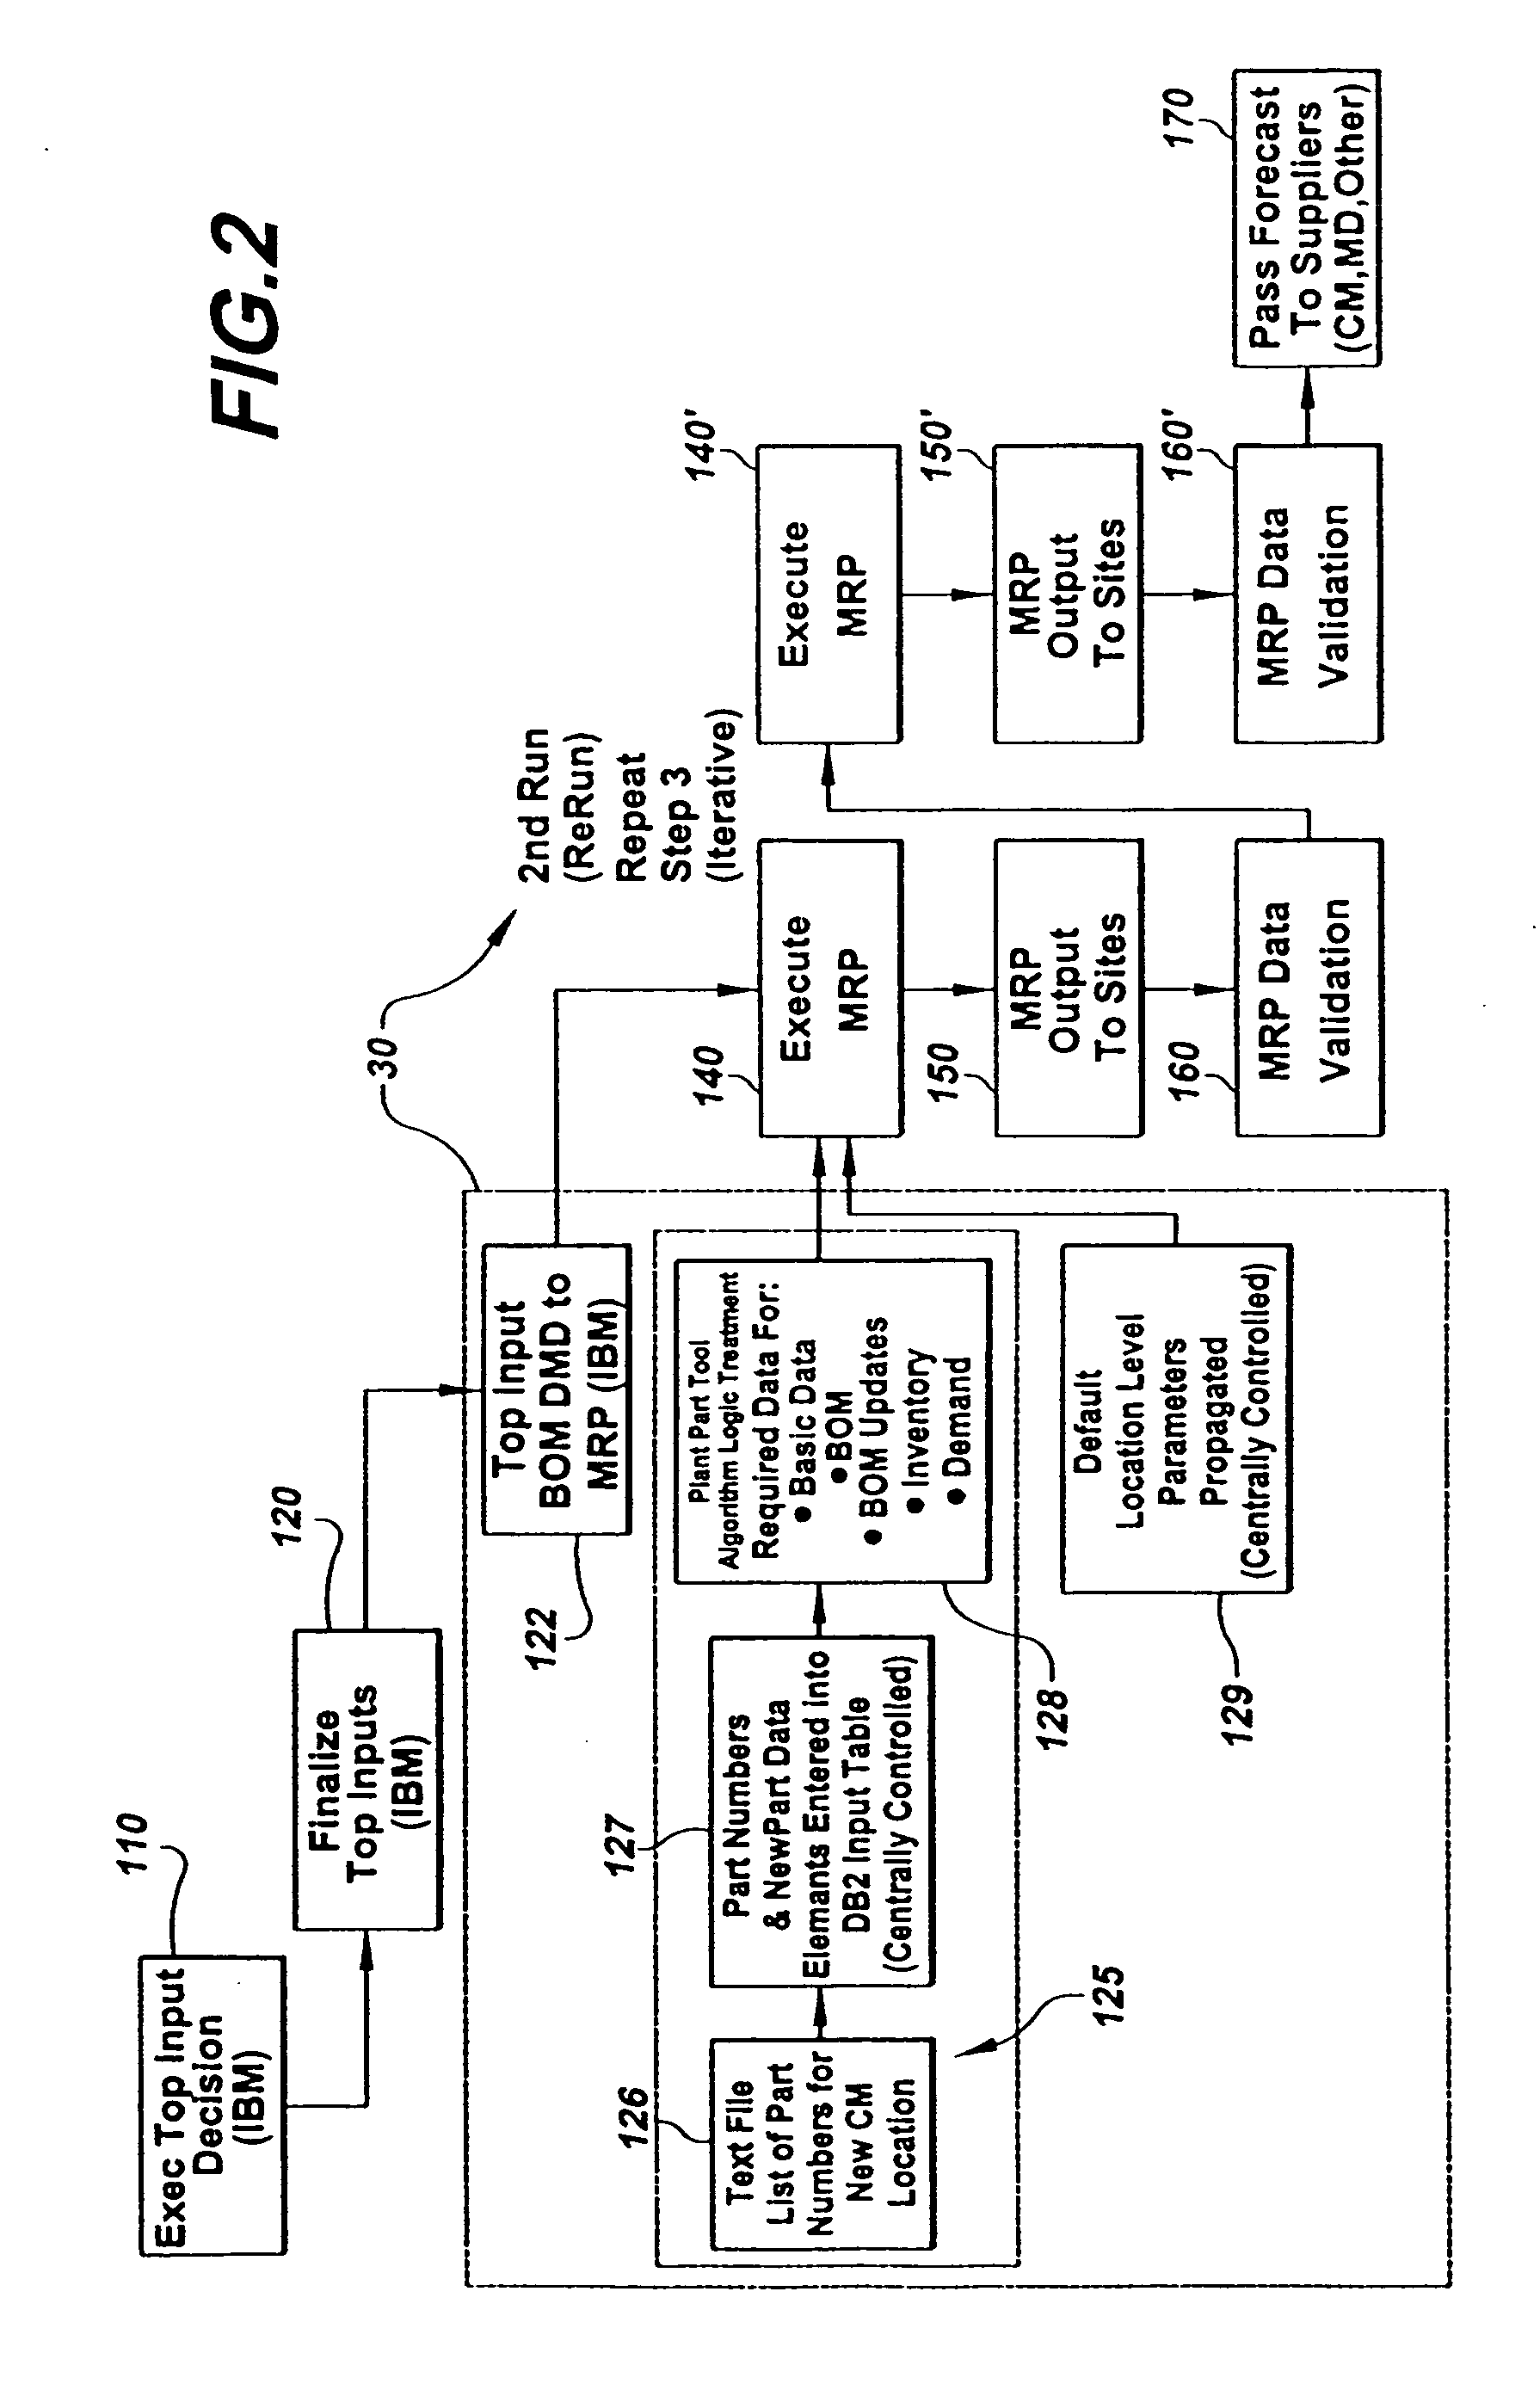 Method for supplier collaboration and data accuracy